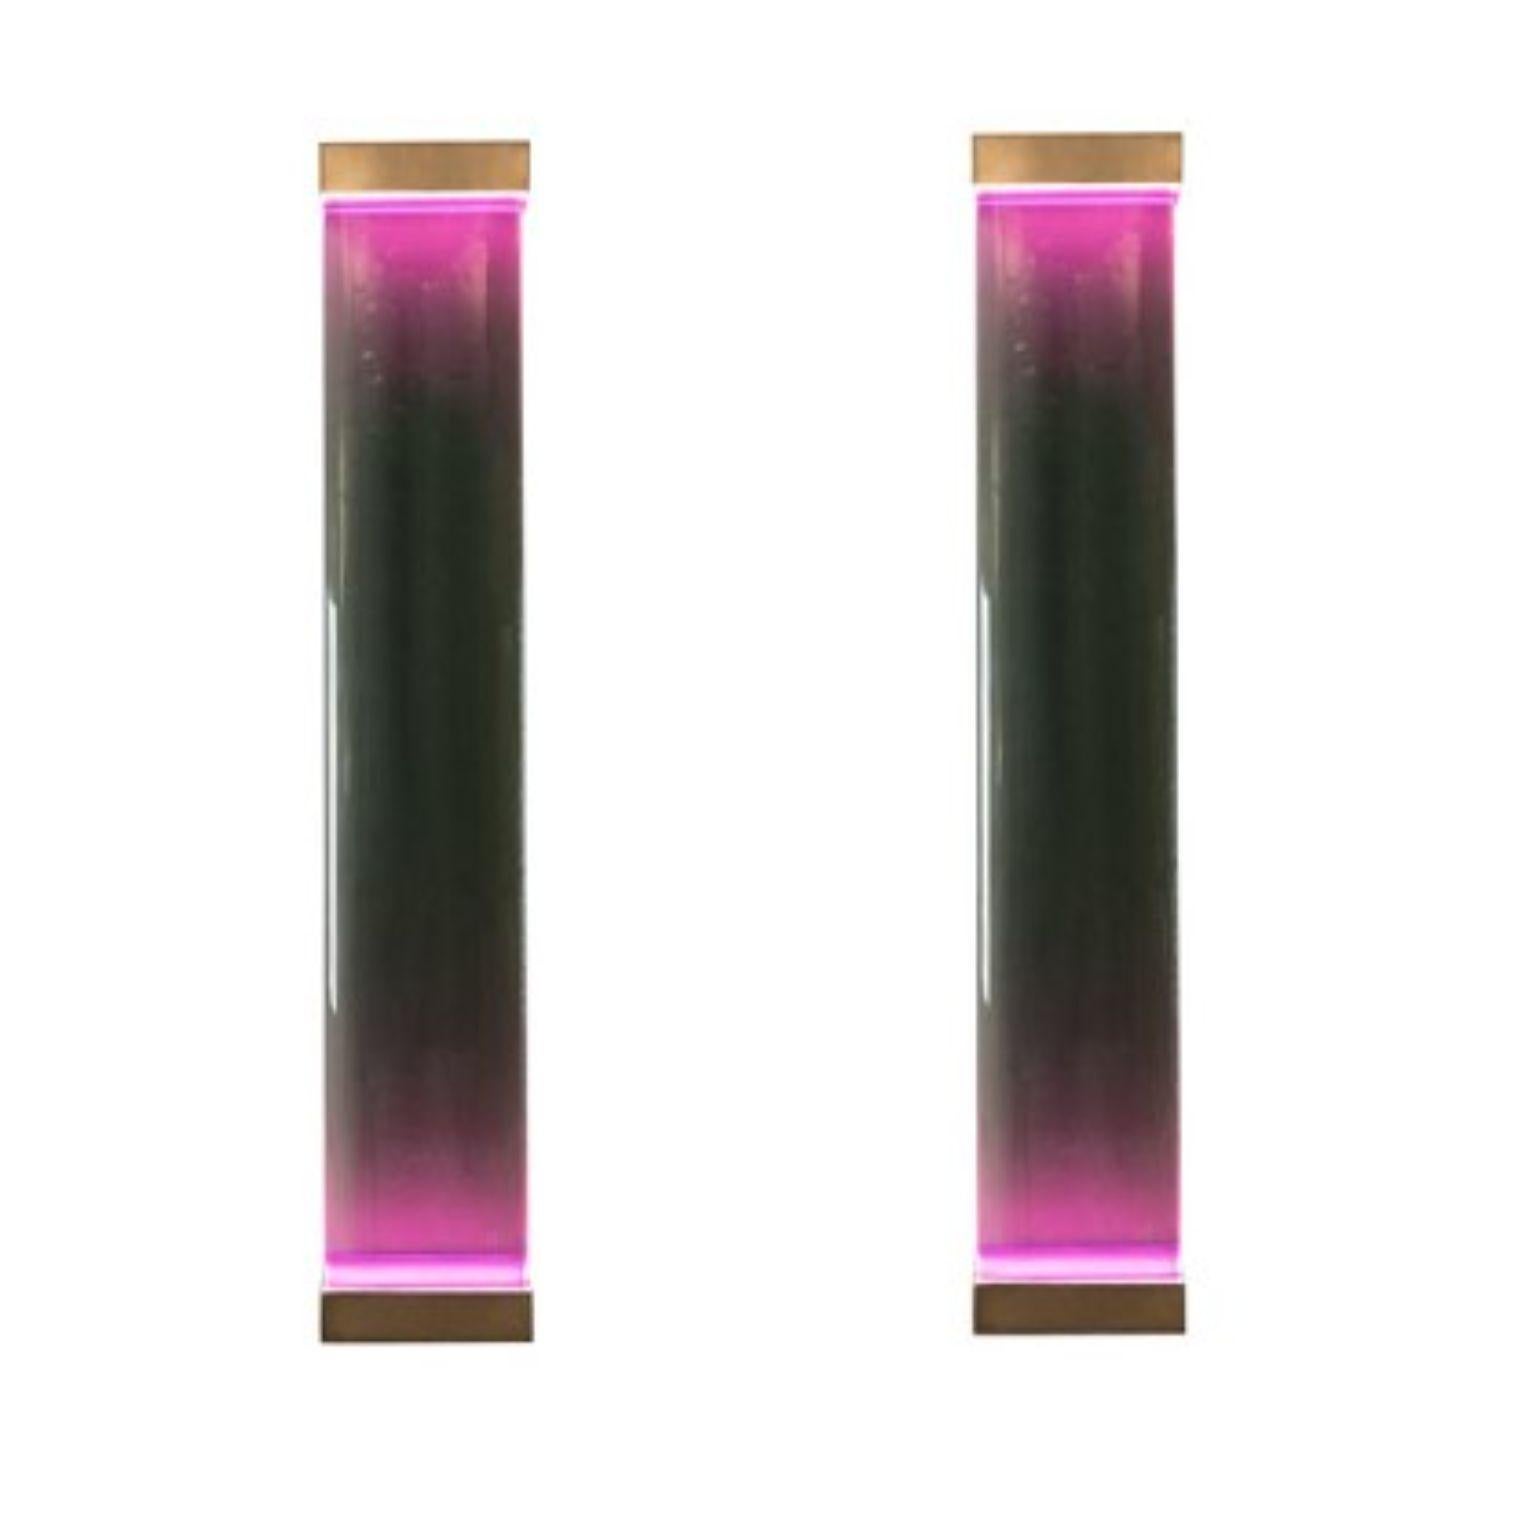 Set of 2 jud wall lamps by Draga & Aurel
Dimensions: W 23, D 10, H 131.
Materials: Resin and brass

All our lamps can be wired according to each country. If sold to the USA it will be wired for the USA for instance.

Inspired by minimalism,